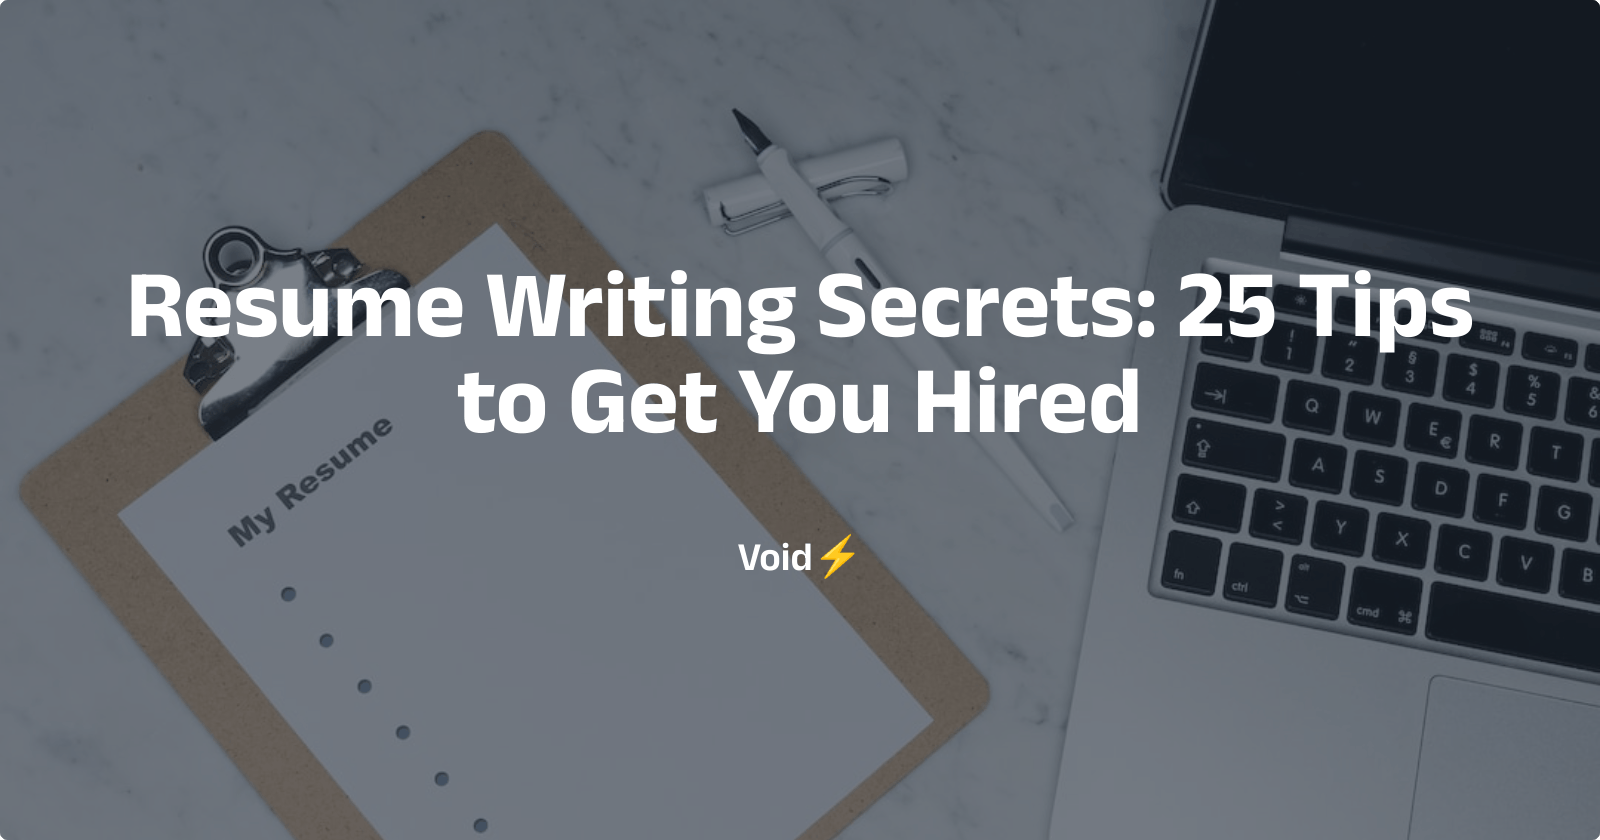 Resume Writing Secrets: 25 Tips to Get You Hired